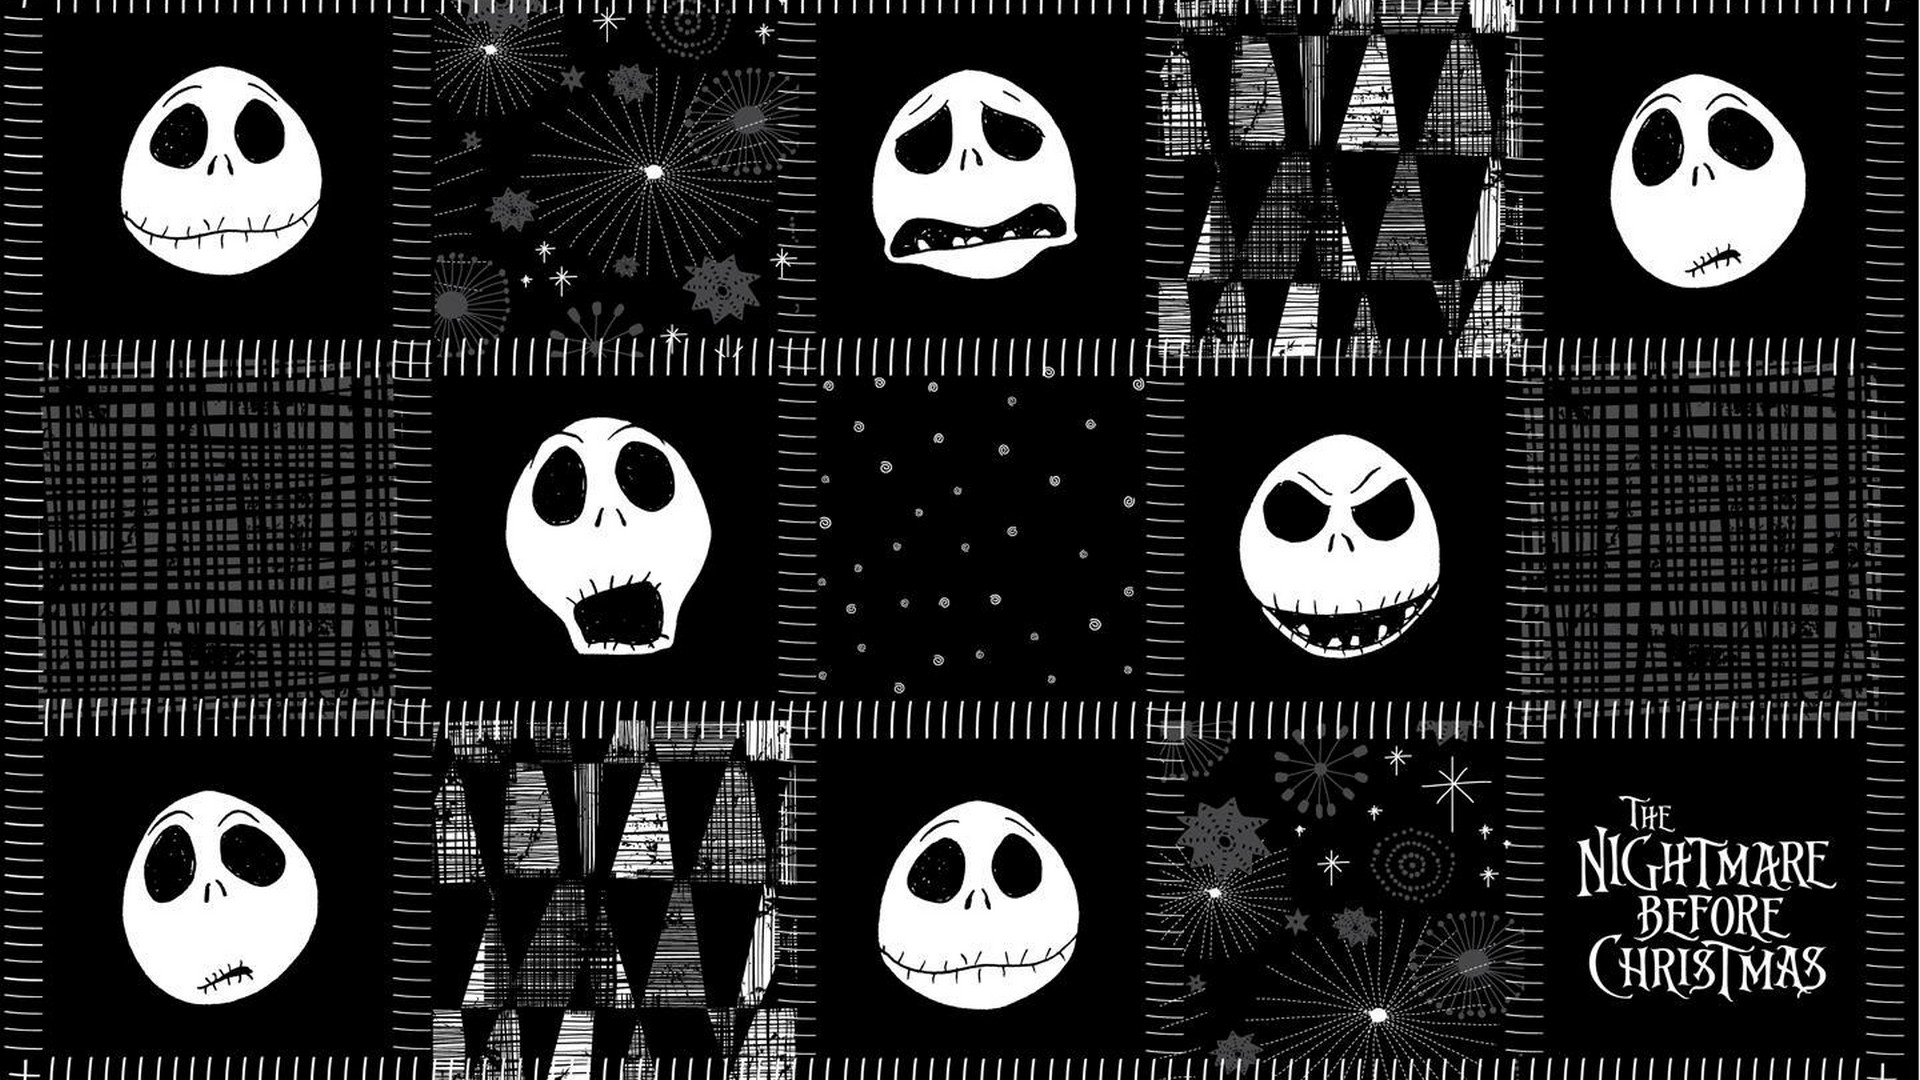 Wallpapers Nightmare Before Christmas with high-resolution 1920x1080 pixel. You can use this poster wallpaper for your Desktop Computers, Mac Screensavers, Windows Backgrounds, iPhone Wallpapers, Tablet or Android Lock screen and another Mobile device